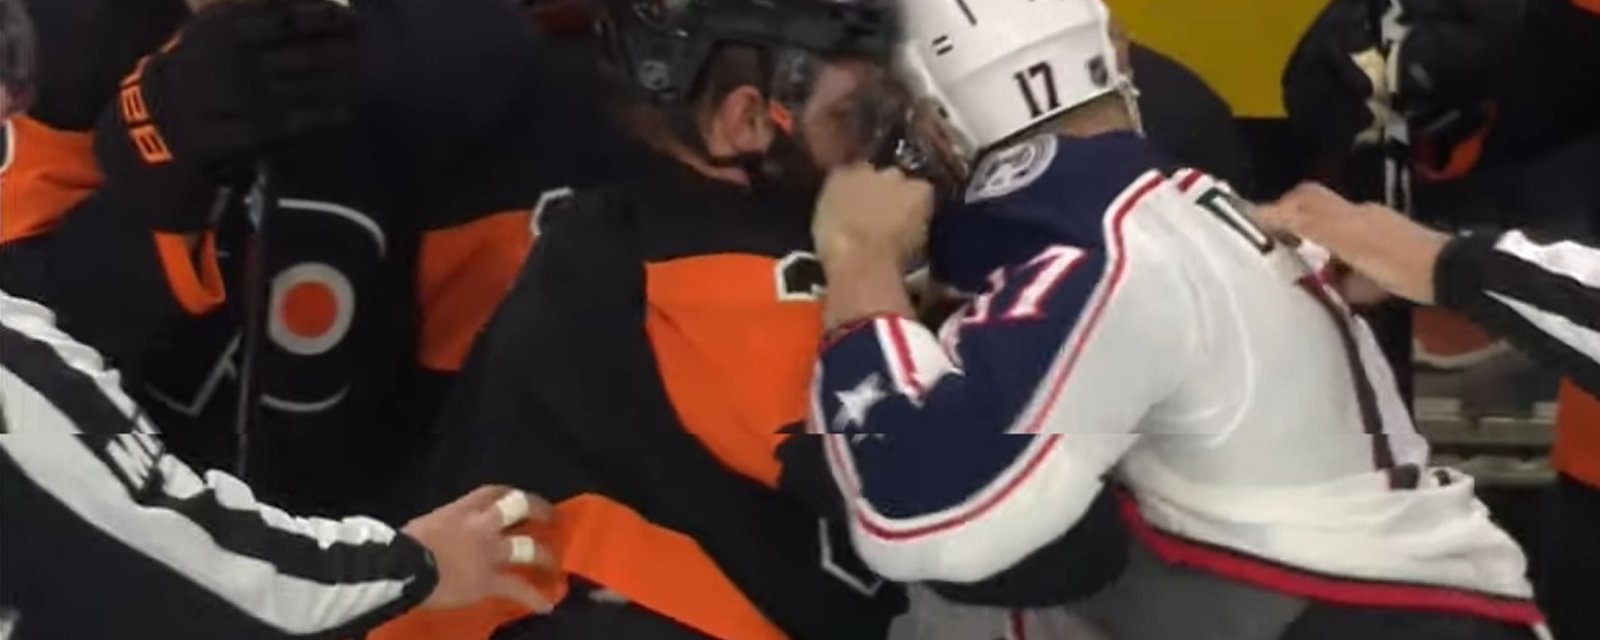 Dubinsky and Gudas square up on Saturday afternoon.